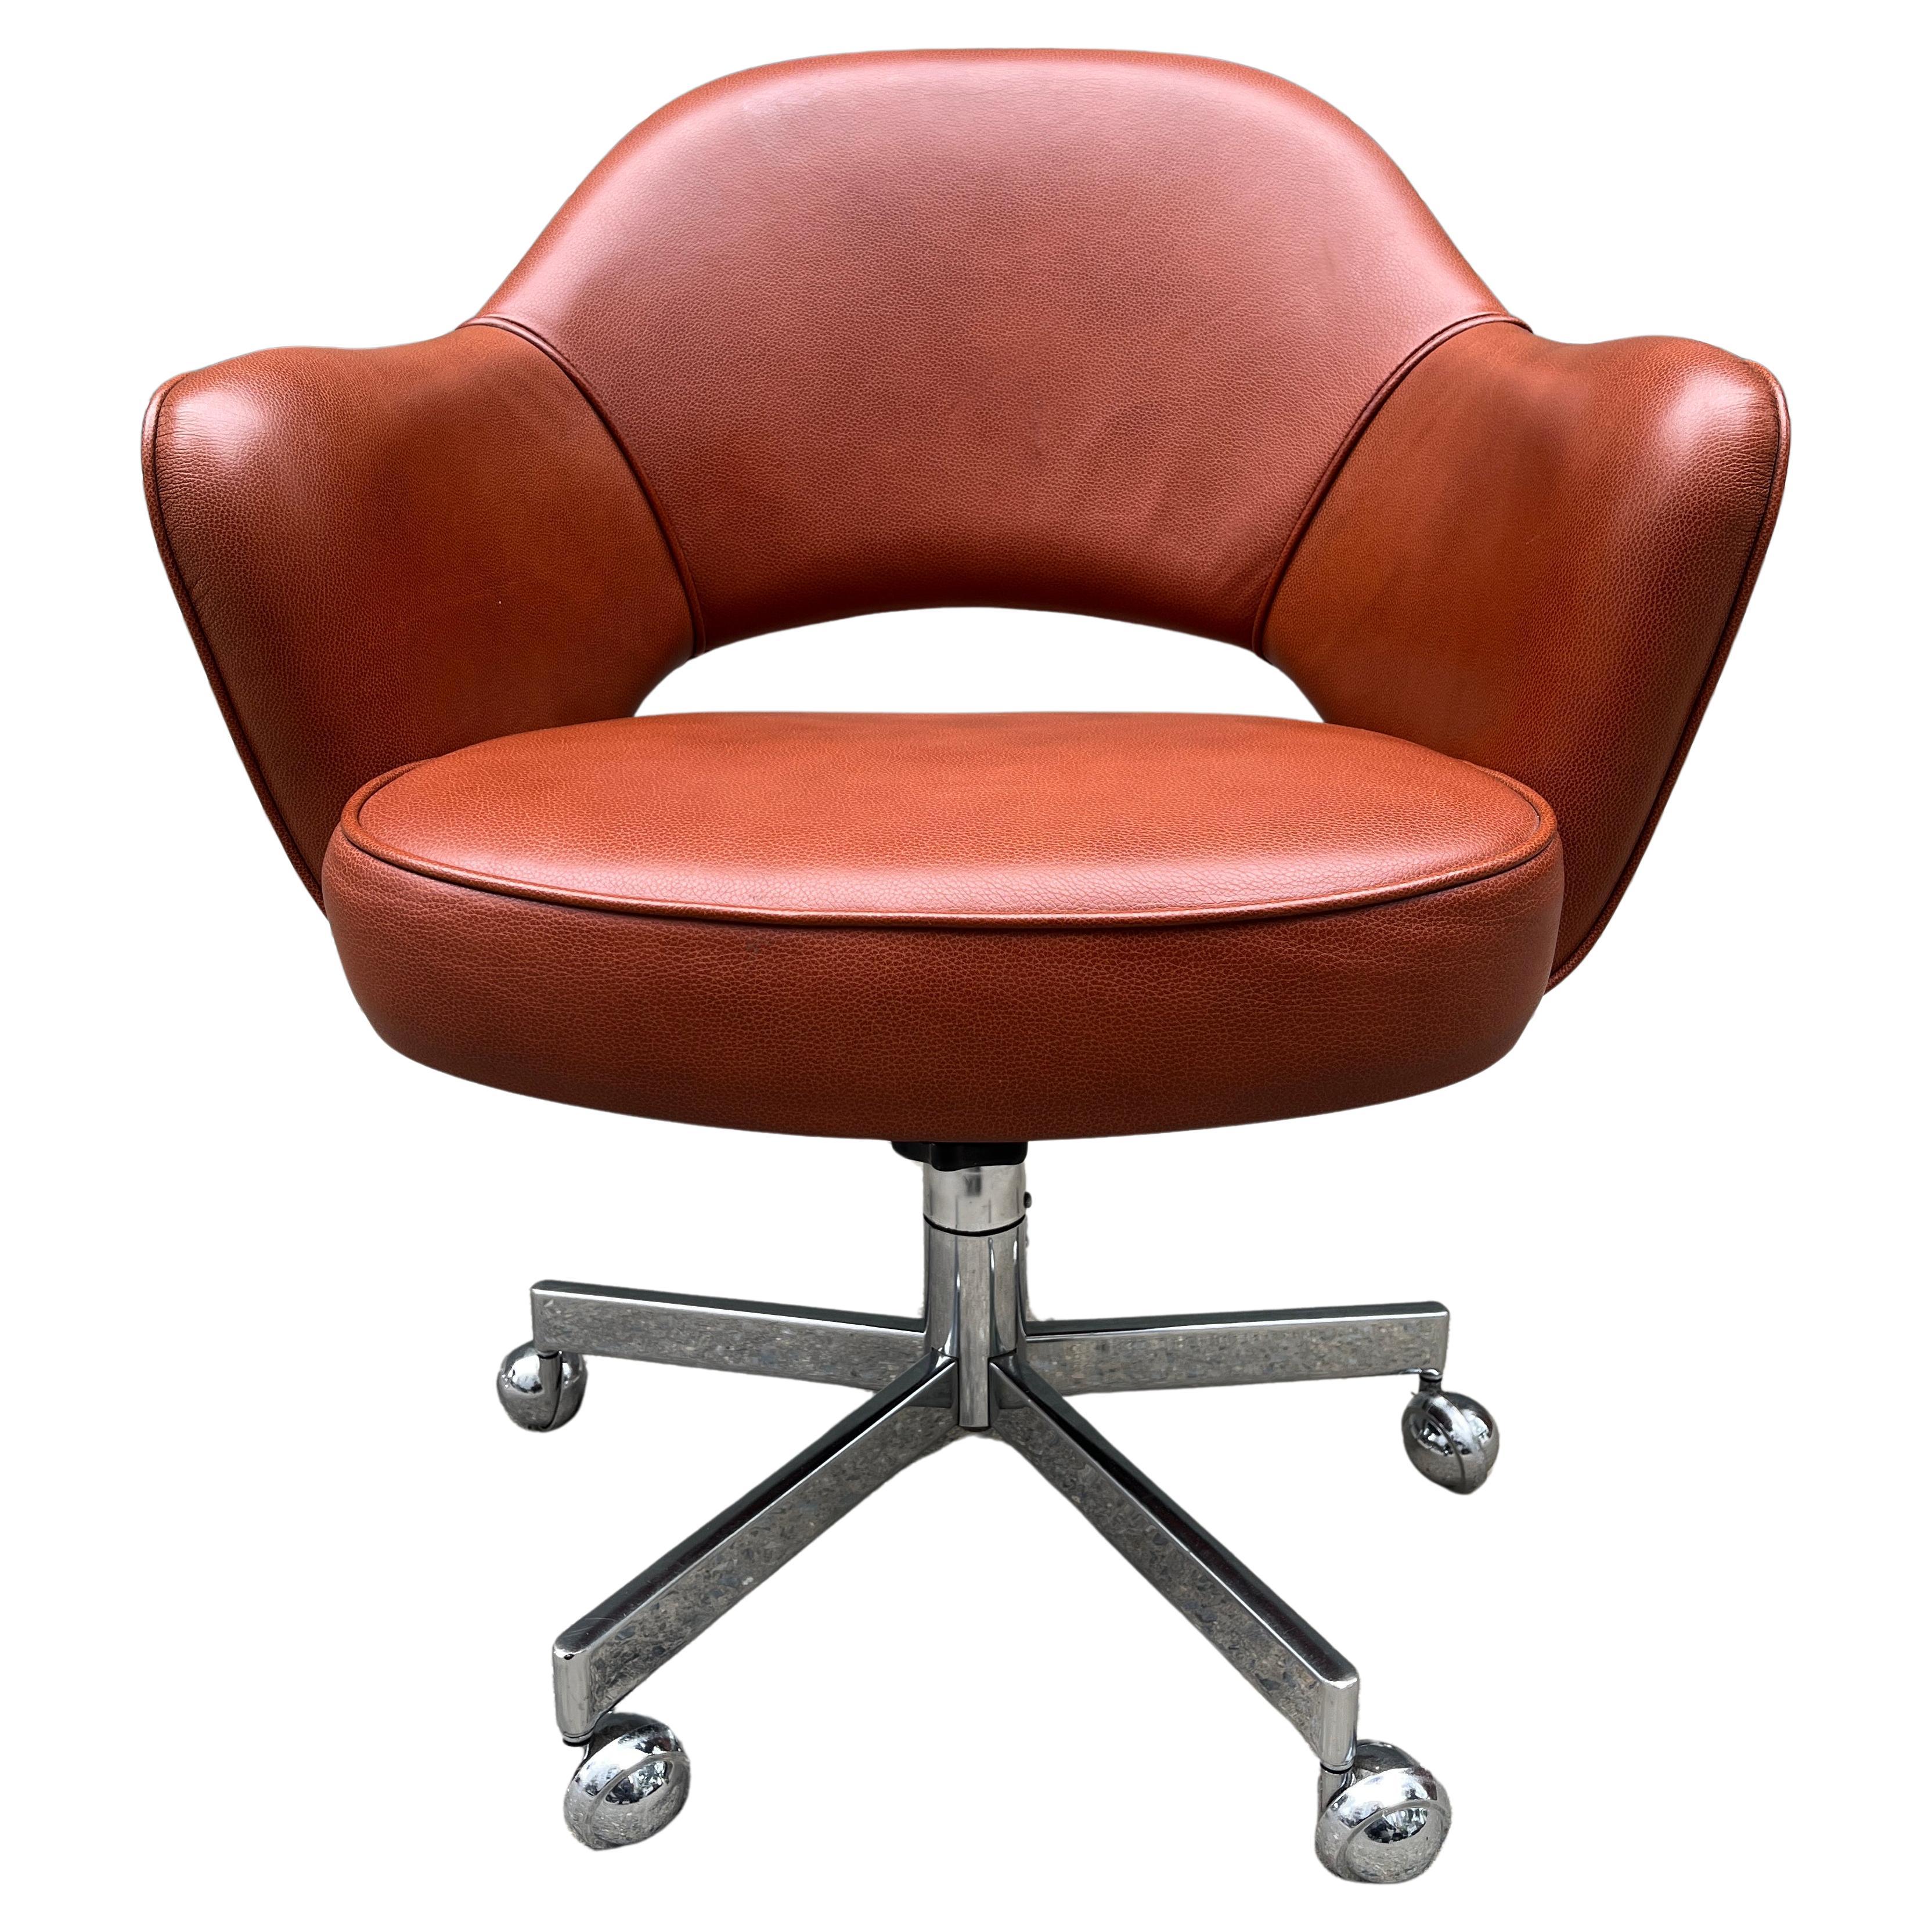 Where are Knoll chairs made?